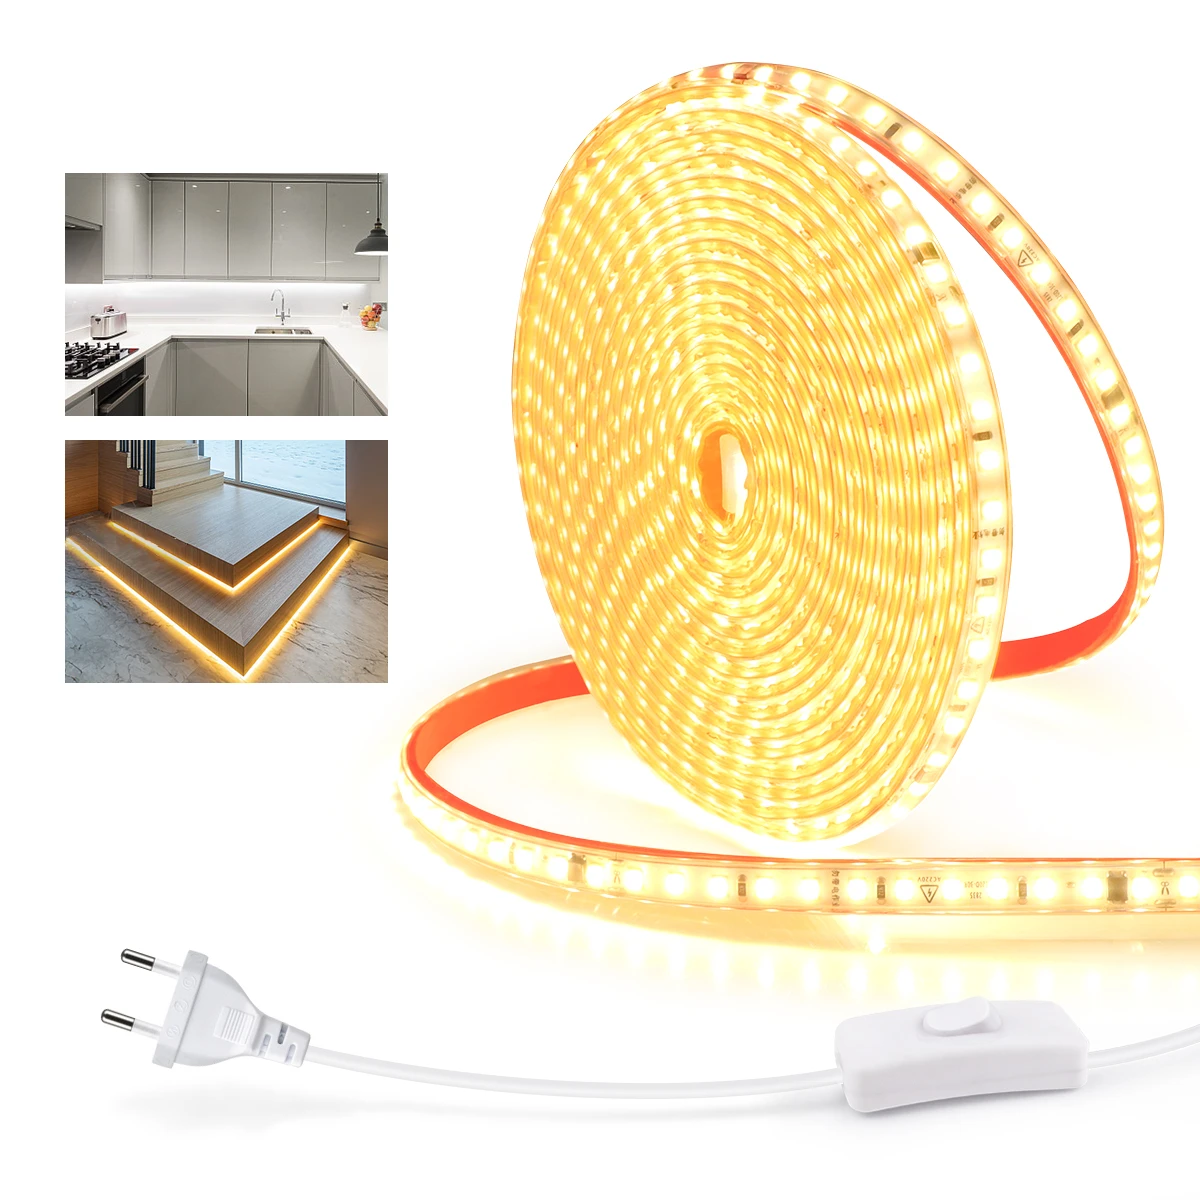 AIMENGTE Super Bright SMD2835 Dimmable 220V LED Strip Light 1M/5M/10M/15M/20M/25M Kitchen Outdoor Garden Lamp Tape with EU Plug